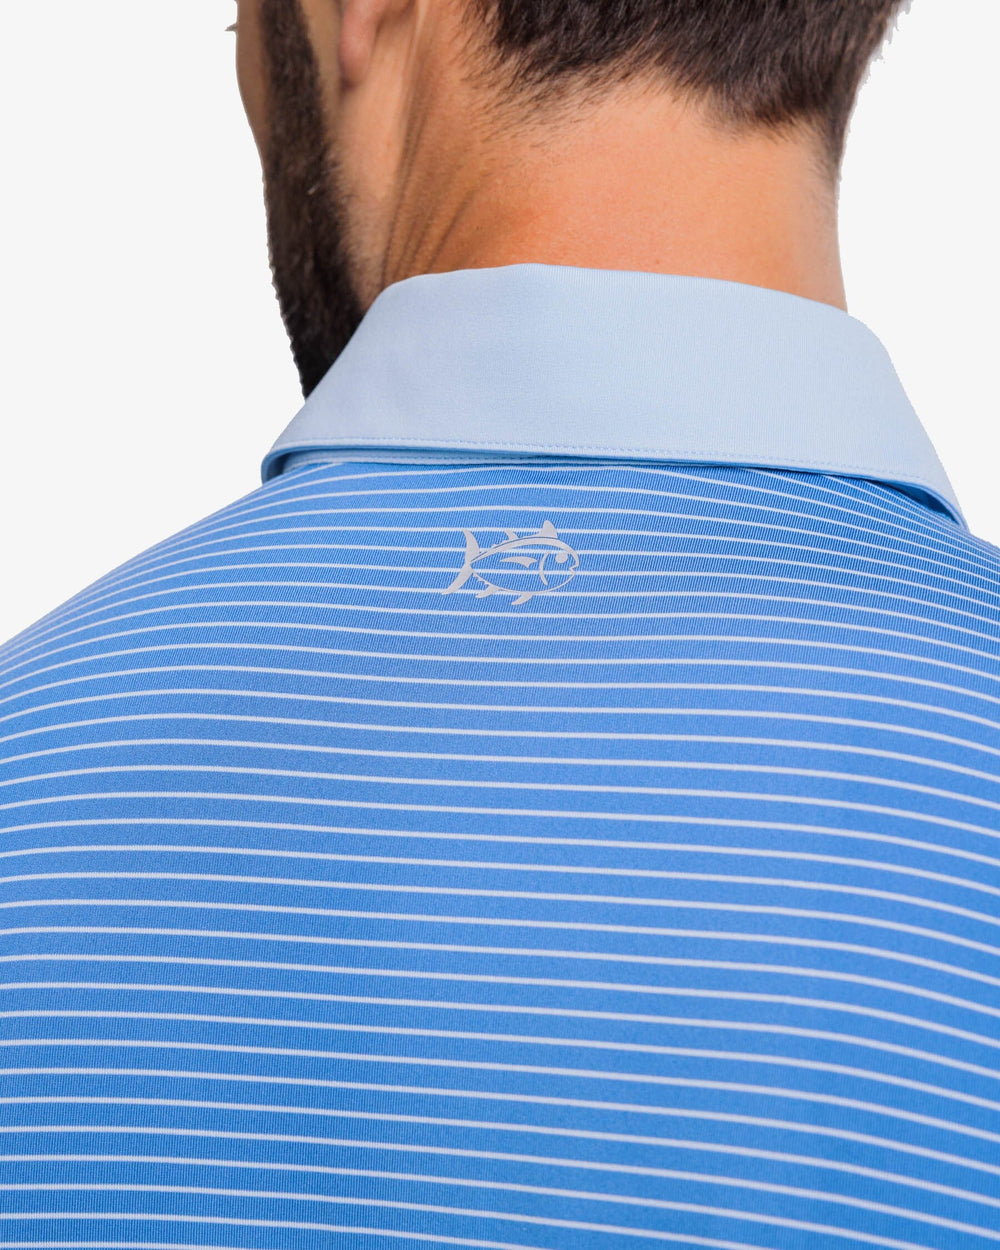 The yoke view of the Southern Tide Driver Bowee Stripe Performance Polo Shirt by Southern Tide - Atlantic Blue